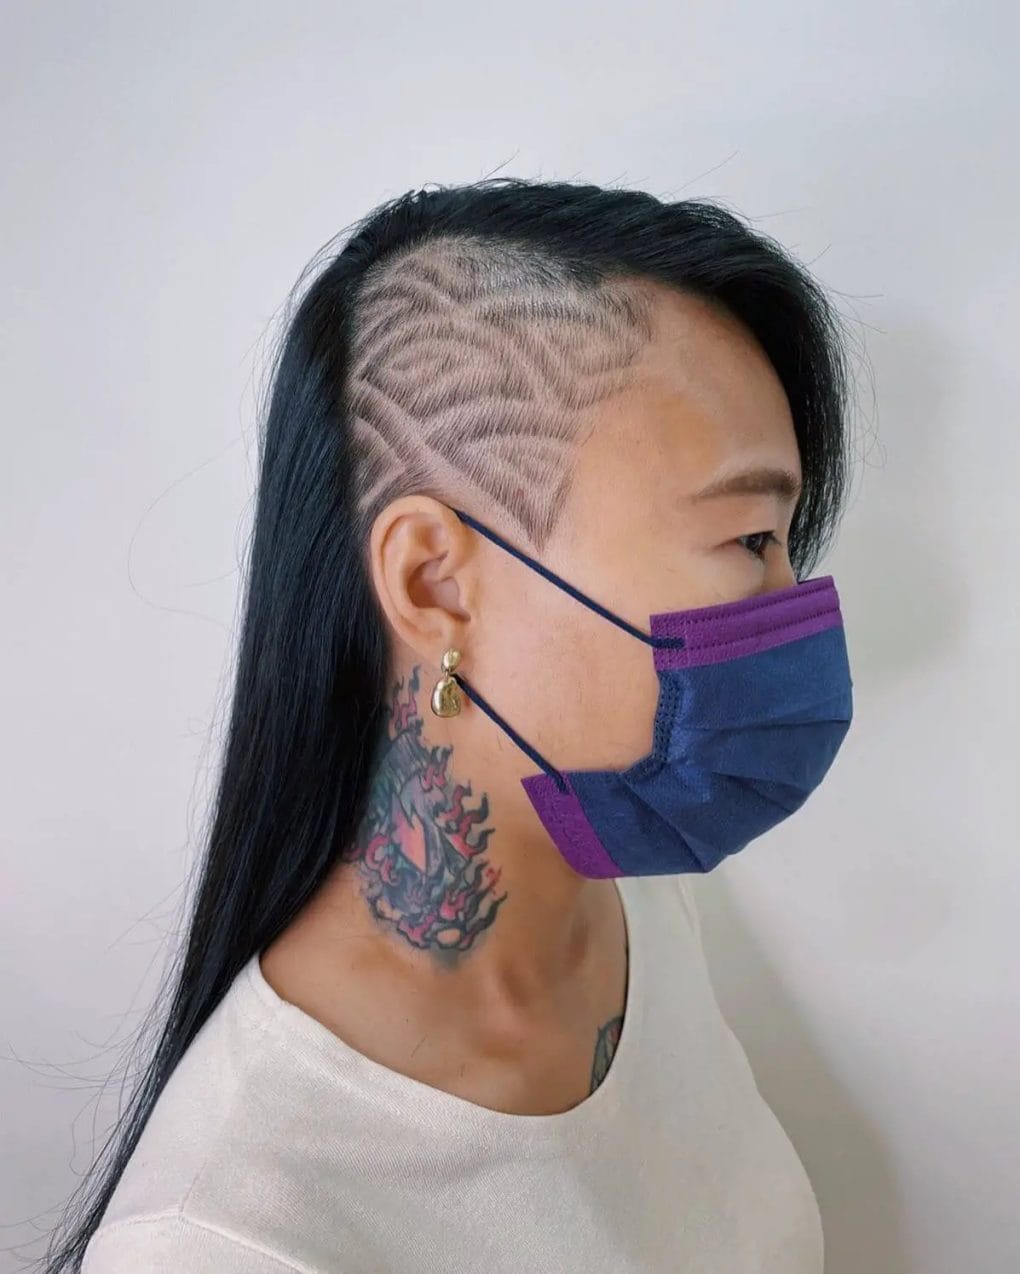 Long, sleek black hair with a detailed, leaf-patterned undercut on one side.